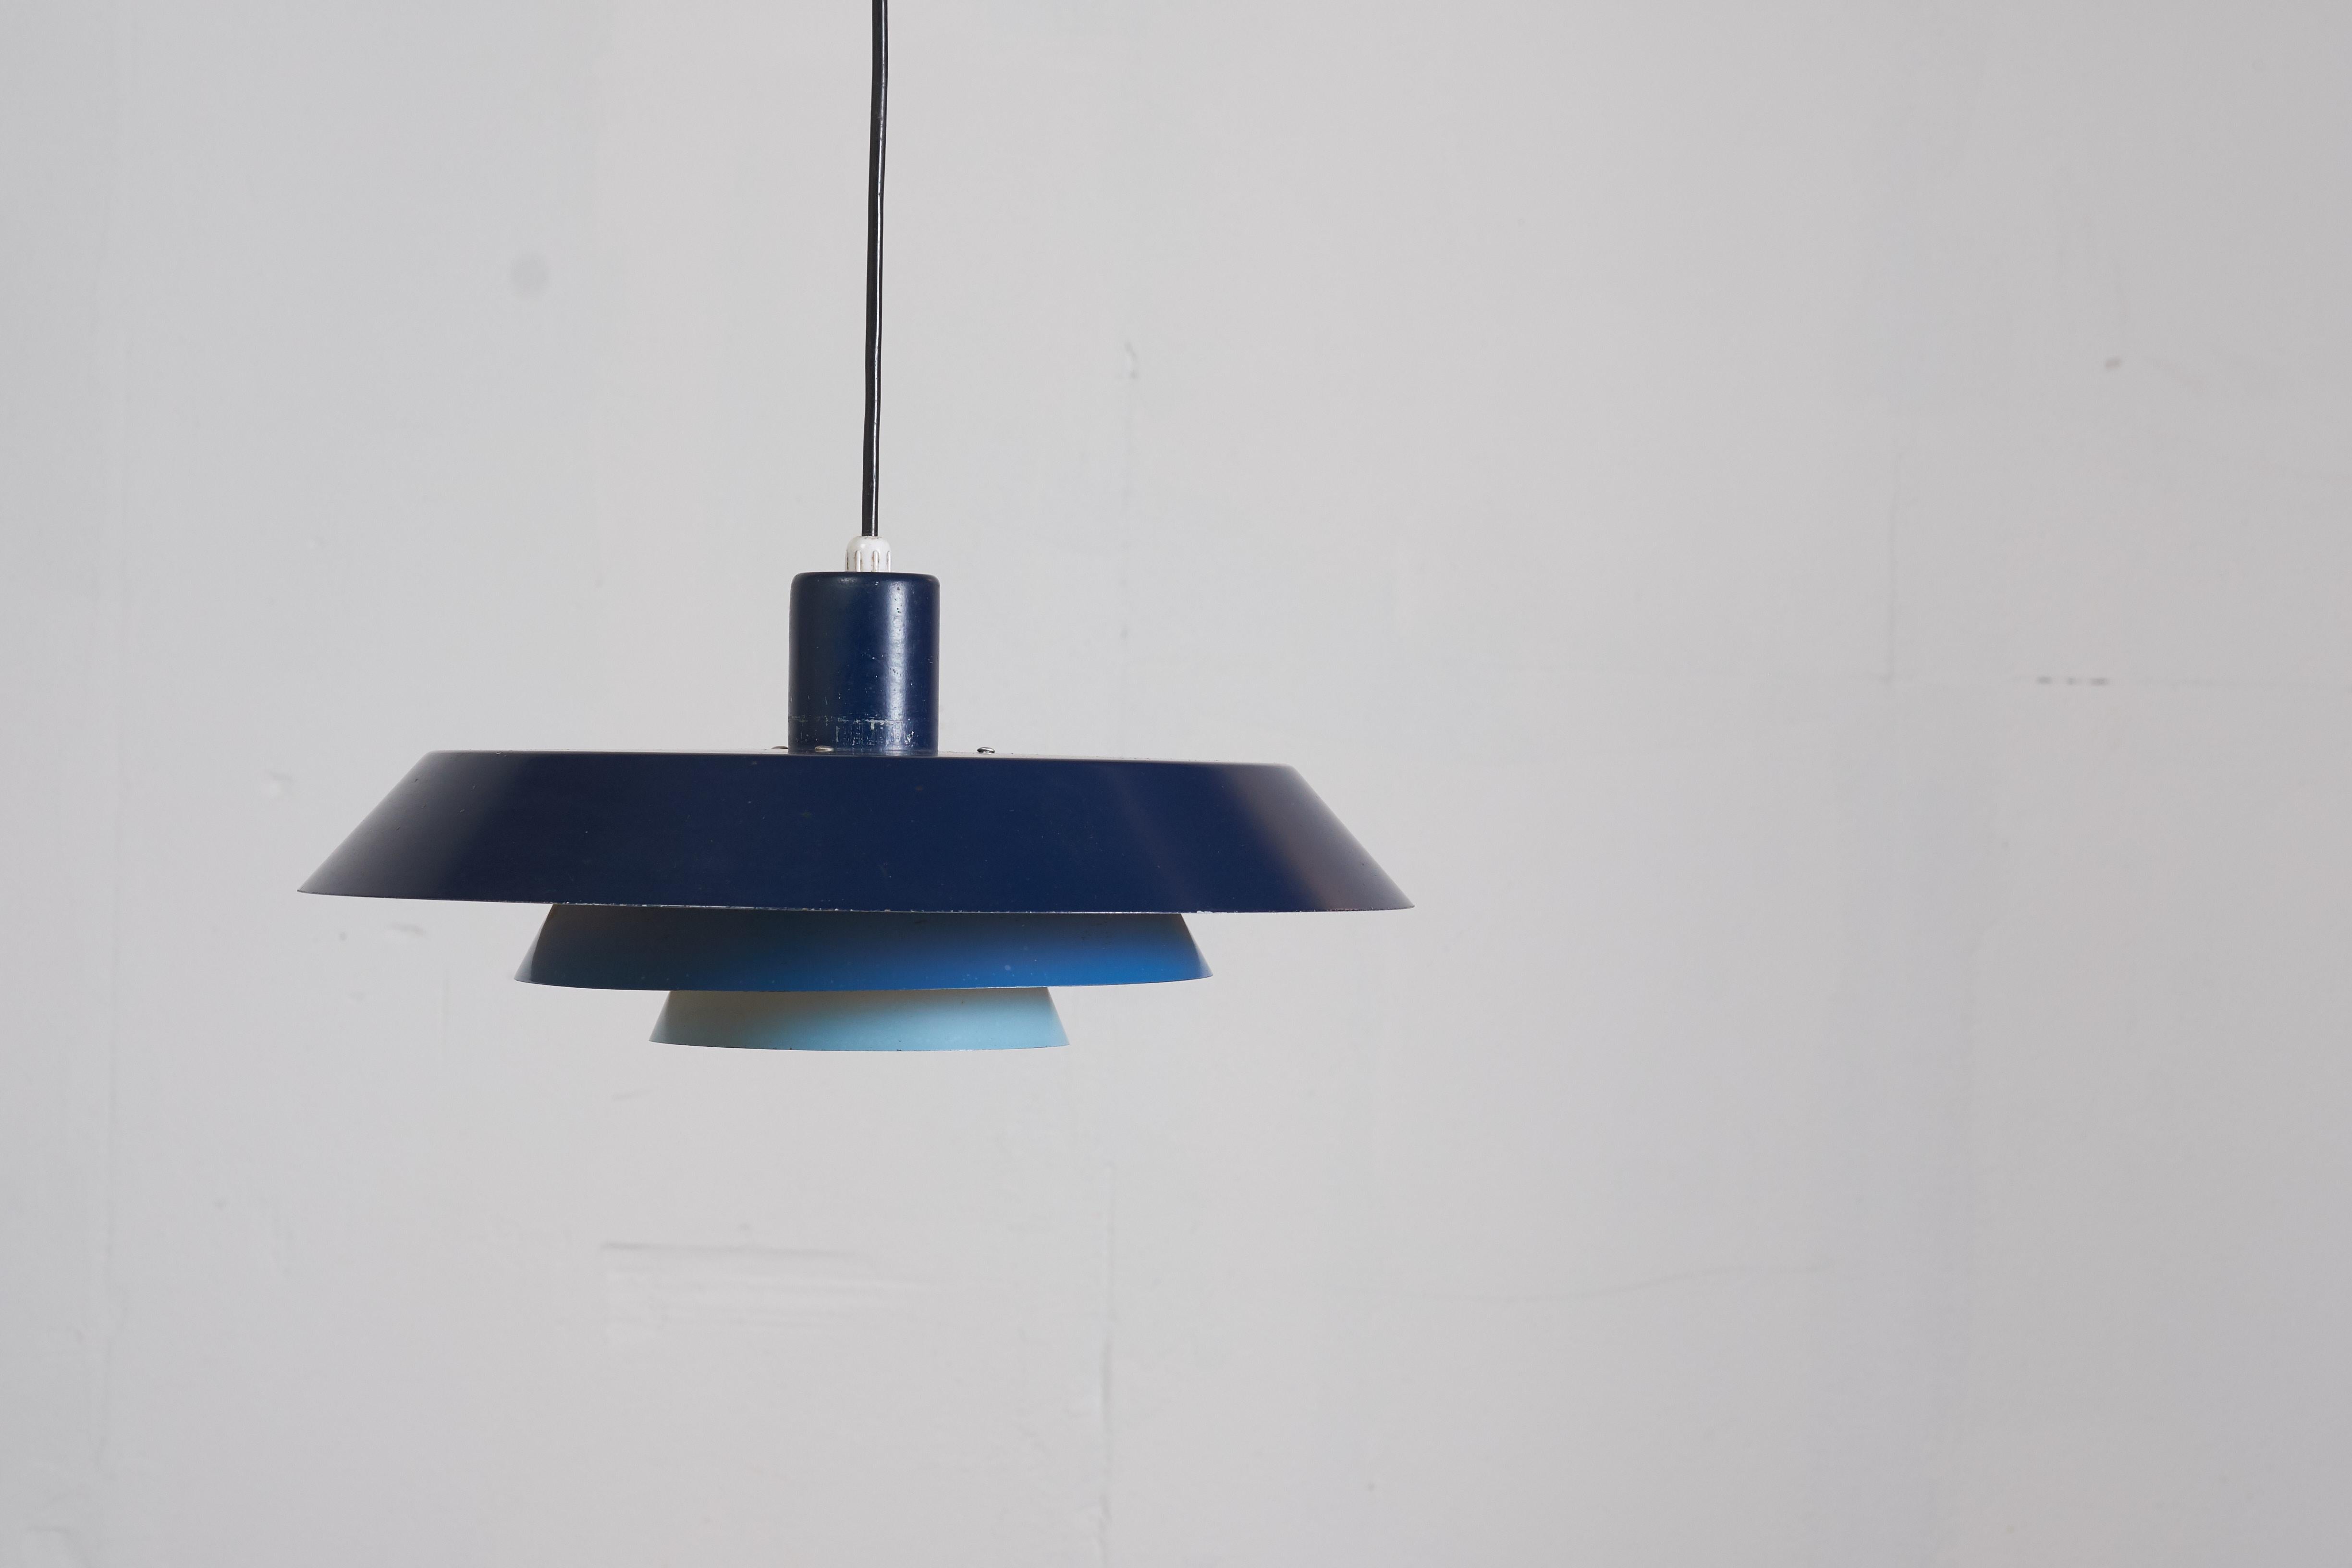 Bent Karlby, created the Troika pendant in 1968 for LYFA. This beautiful pendant is part of the so called 'Lyfalux' series, which are according to the advertisement from the 1960s “shining examples of modern lightings”.
Bent Karlby designed three